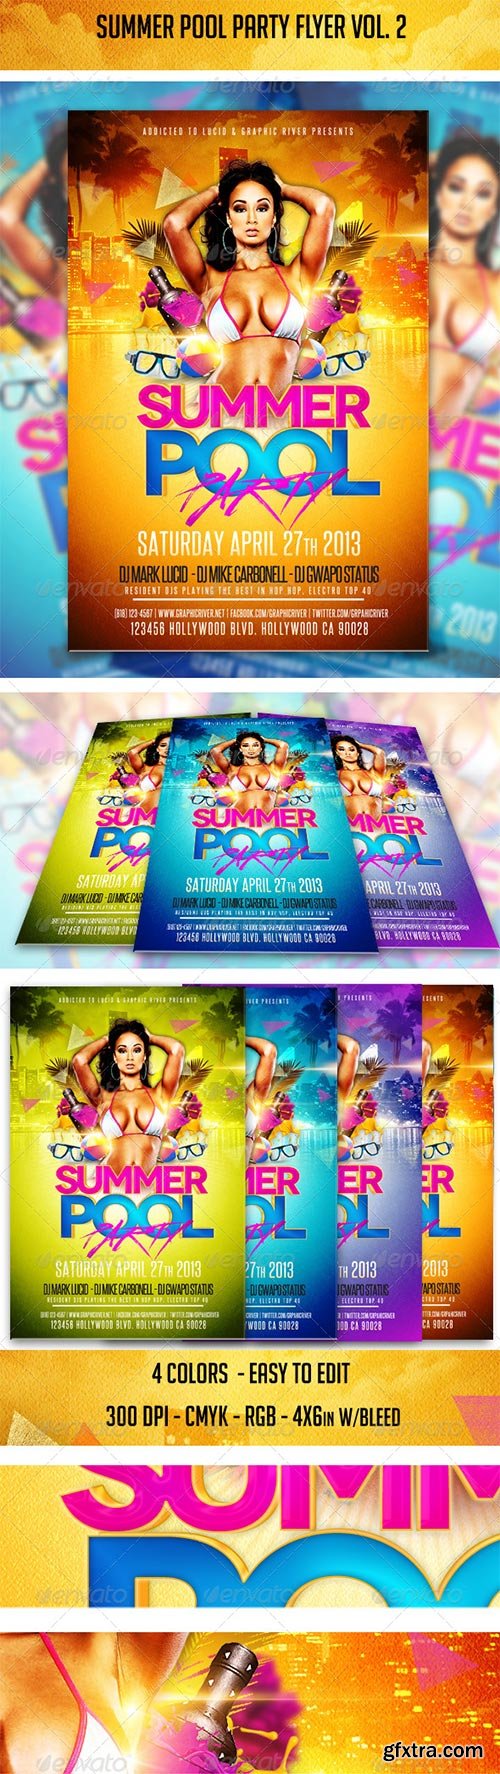 GraphicRiver - Summer Pool Party Flyer Vol. 2, 4166537